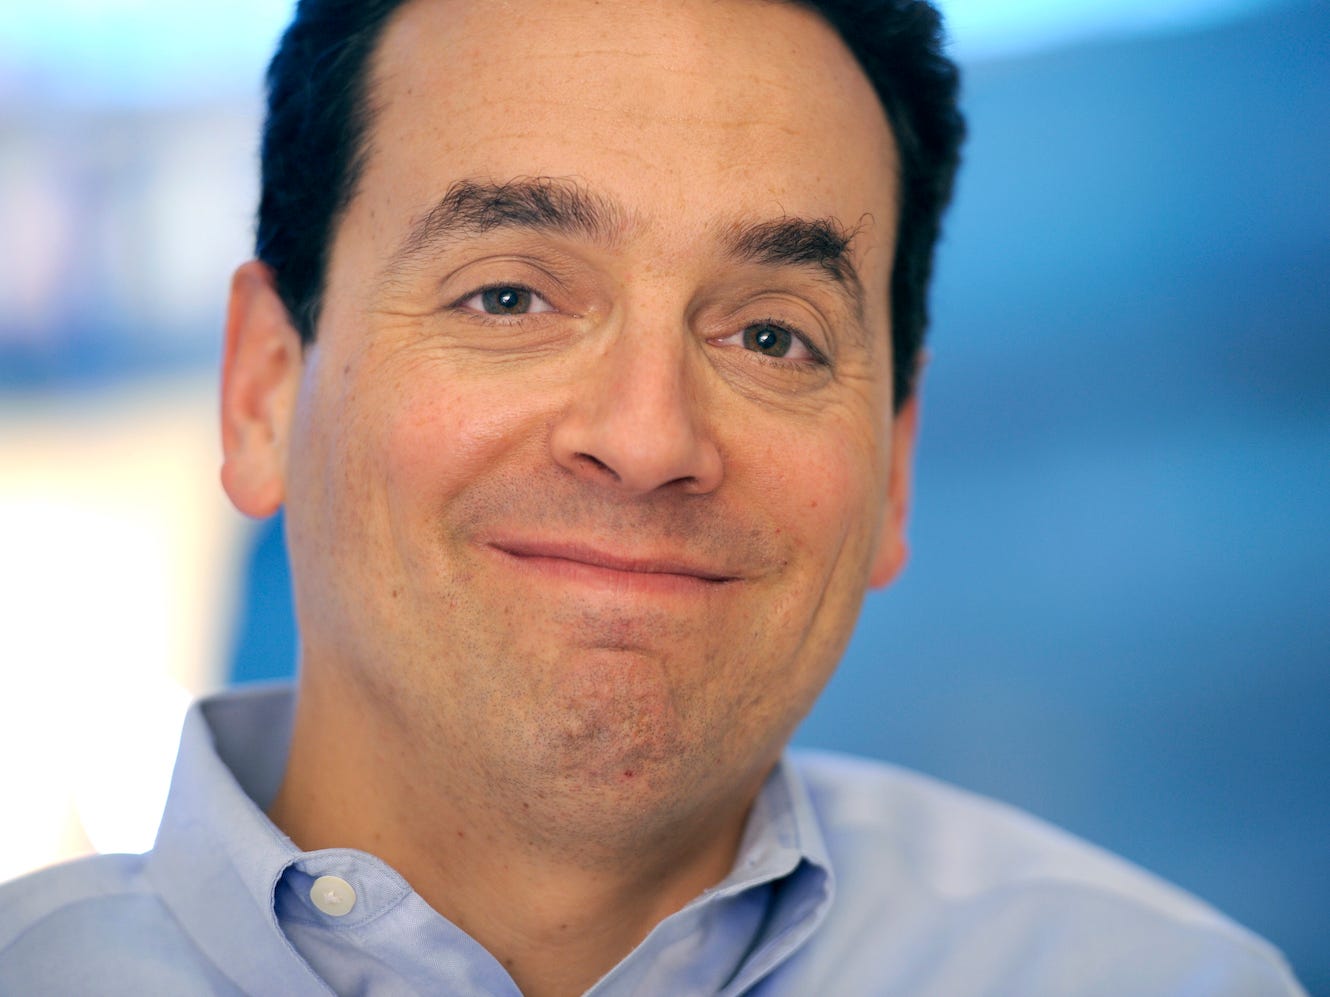 The author, Dan Pink, in 2012, wearing a blue shirt and smiling.